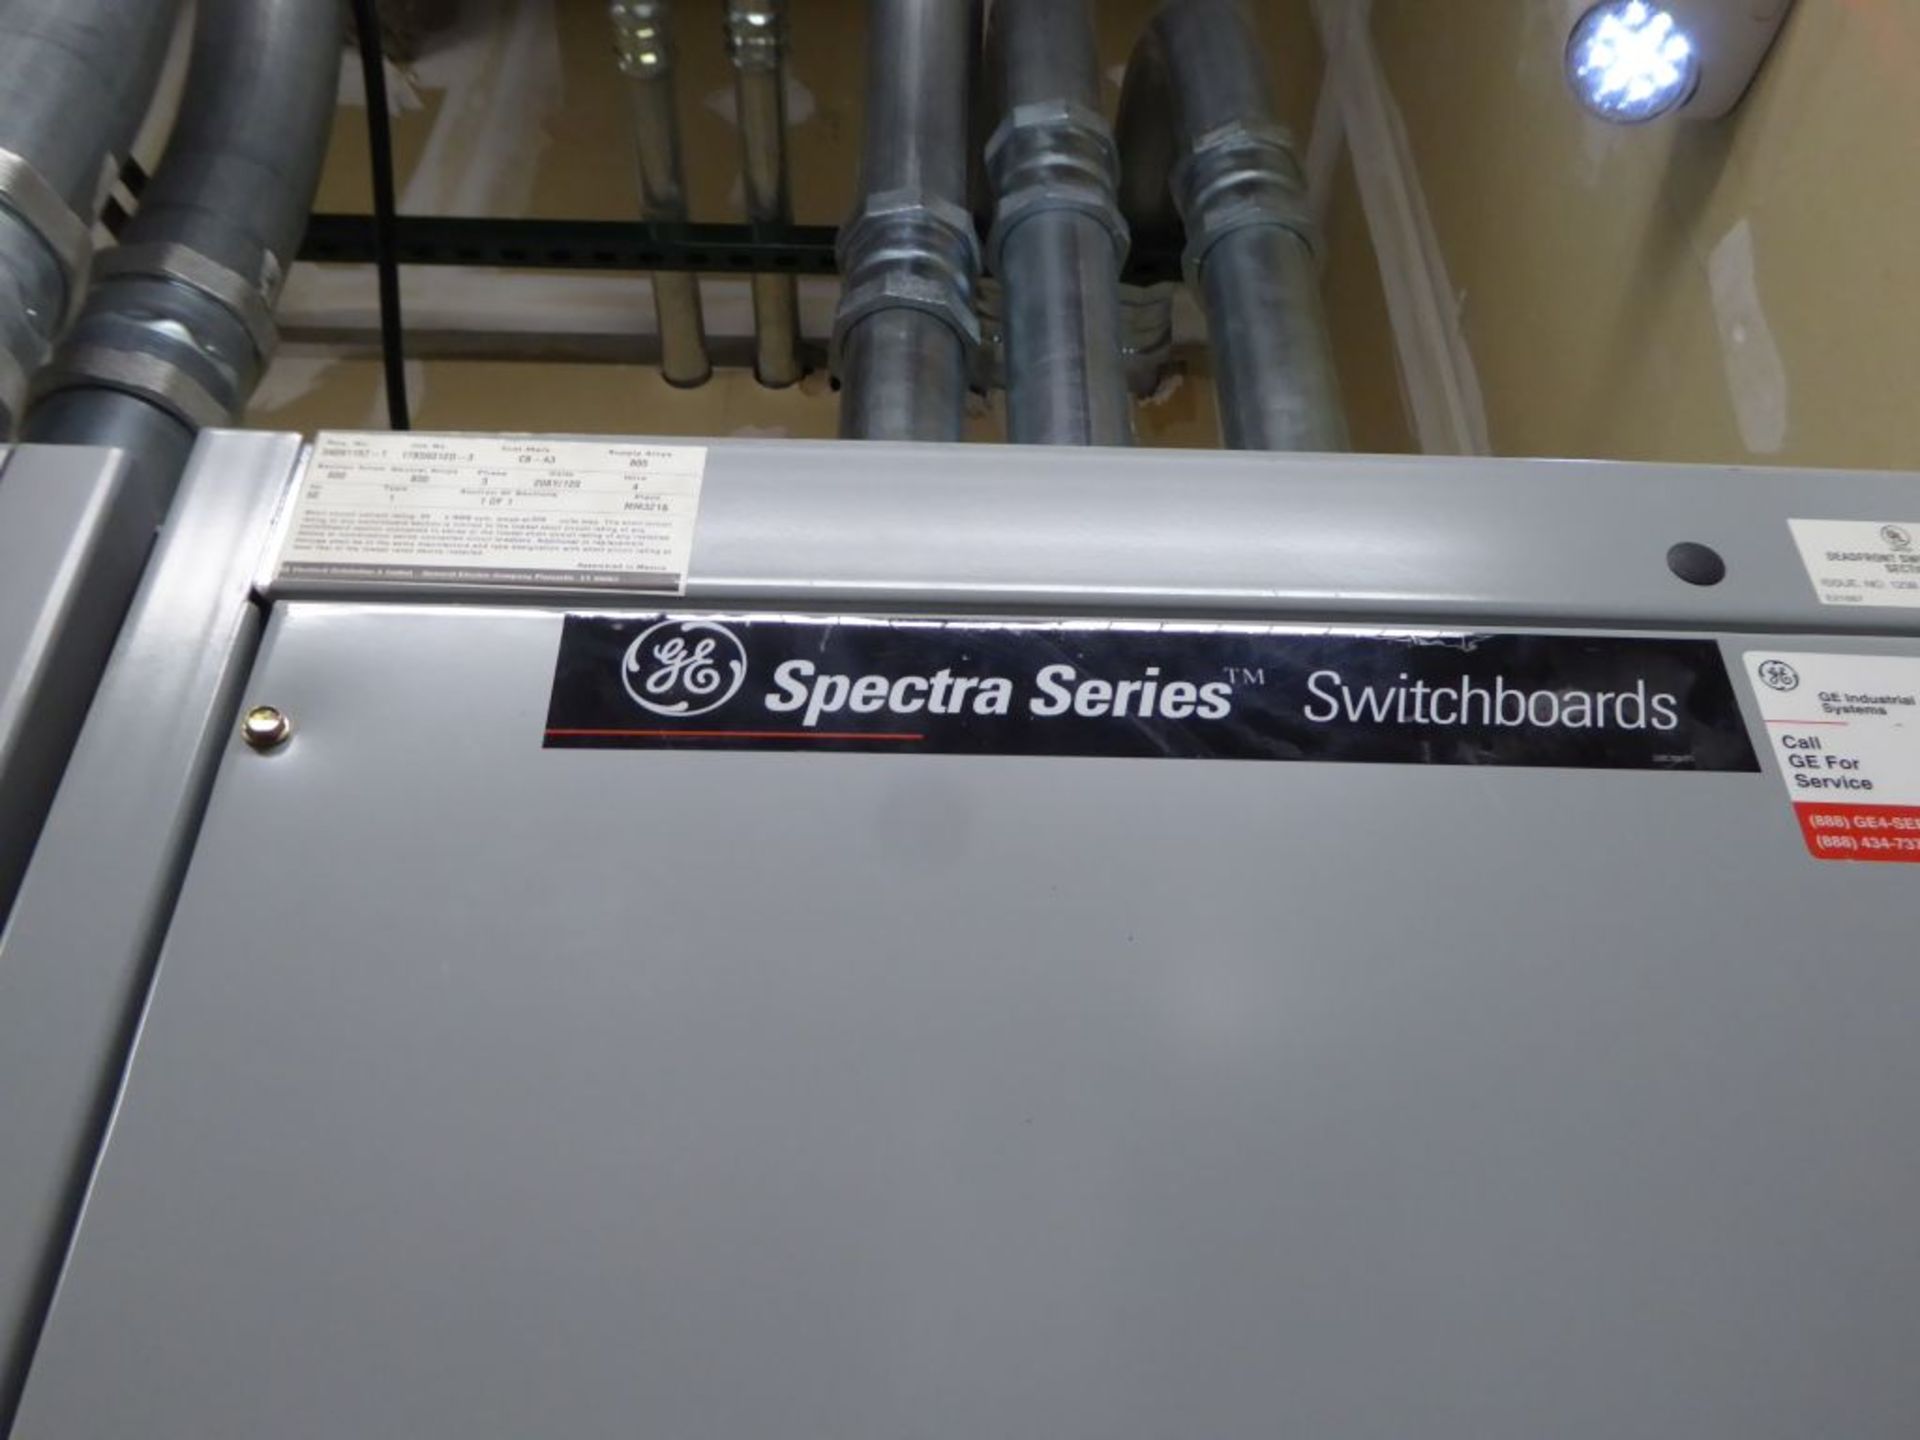 Spartanburg, SC - GE 800A Spectra Series Switchboard - Image 3 of 4